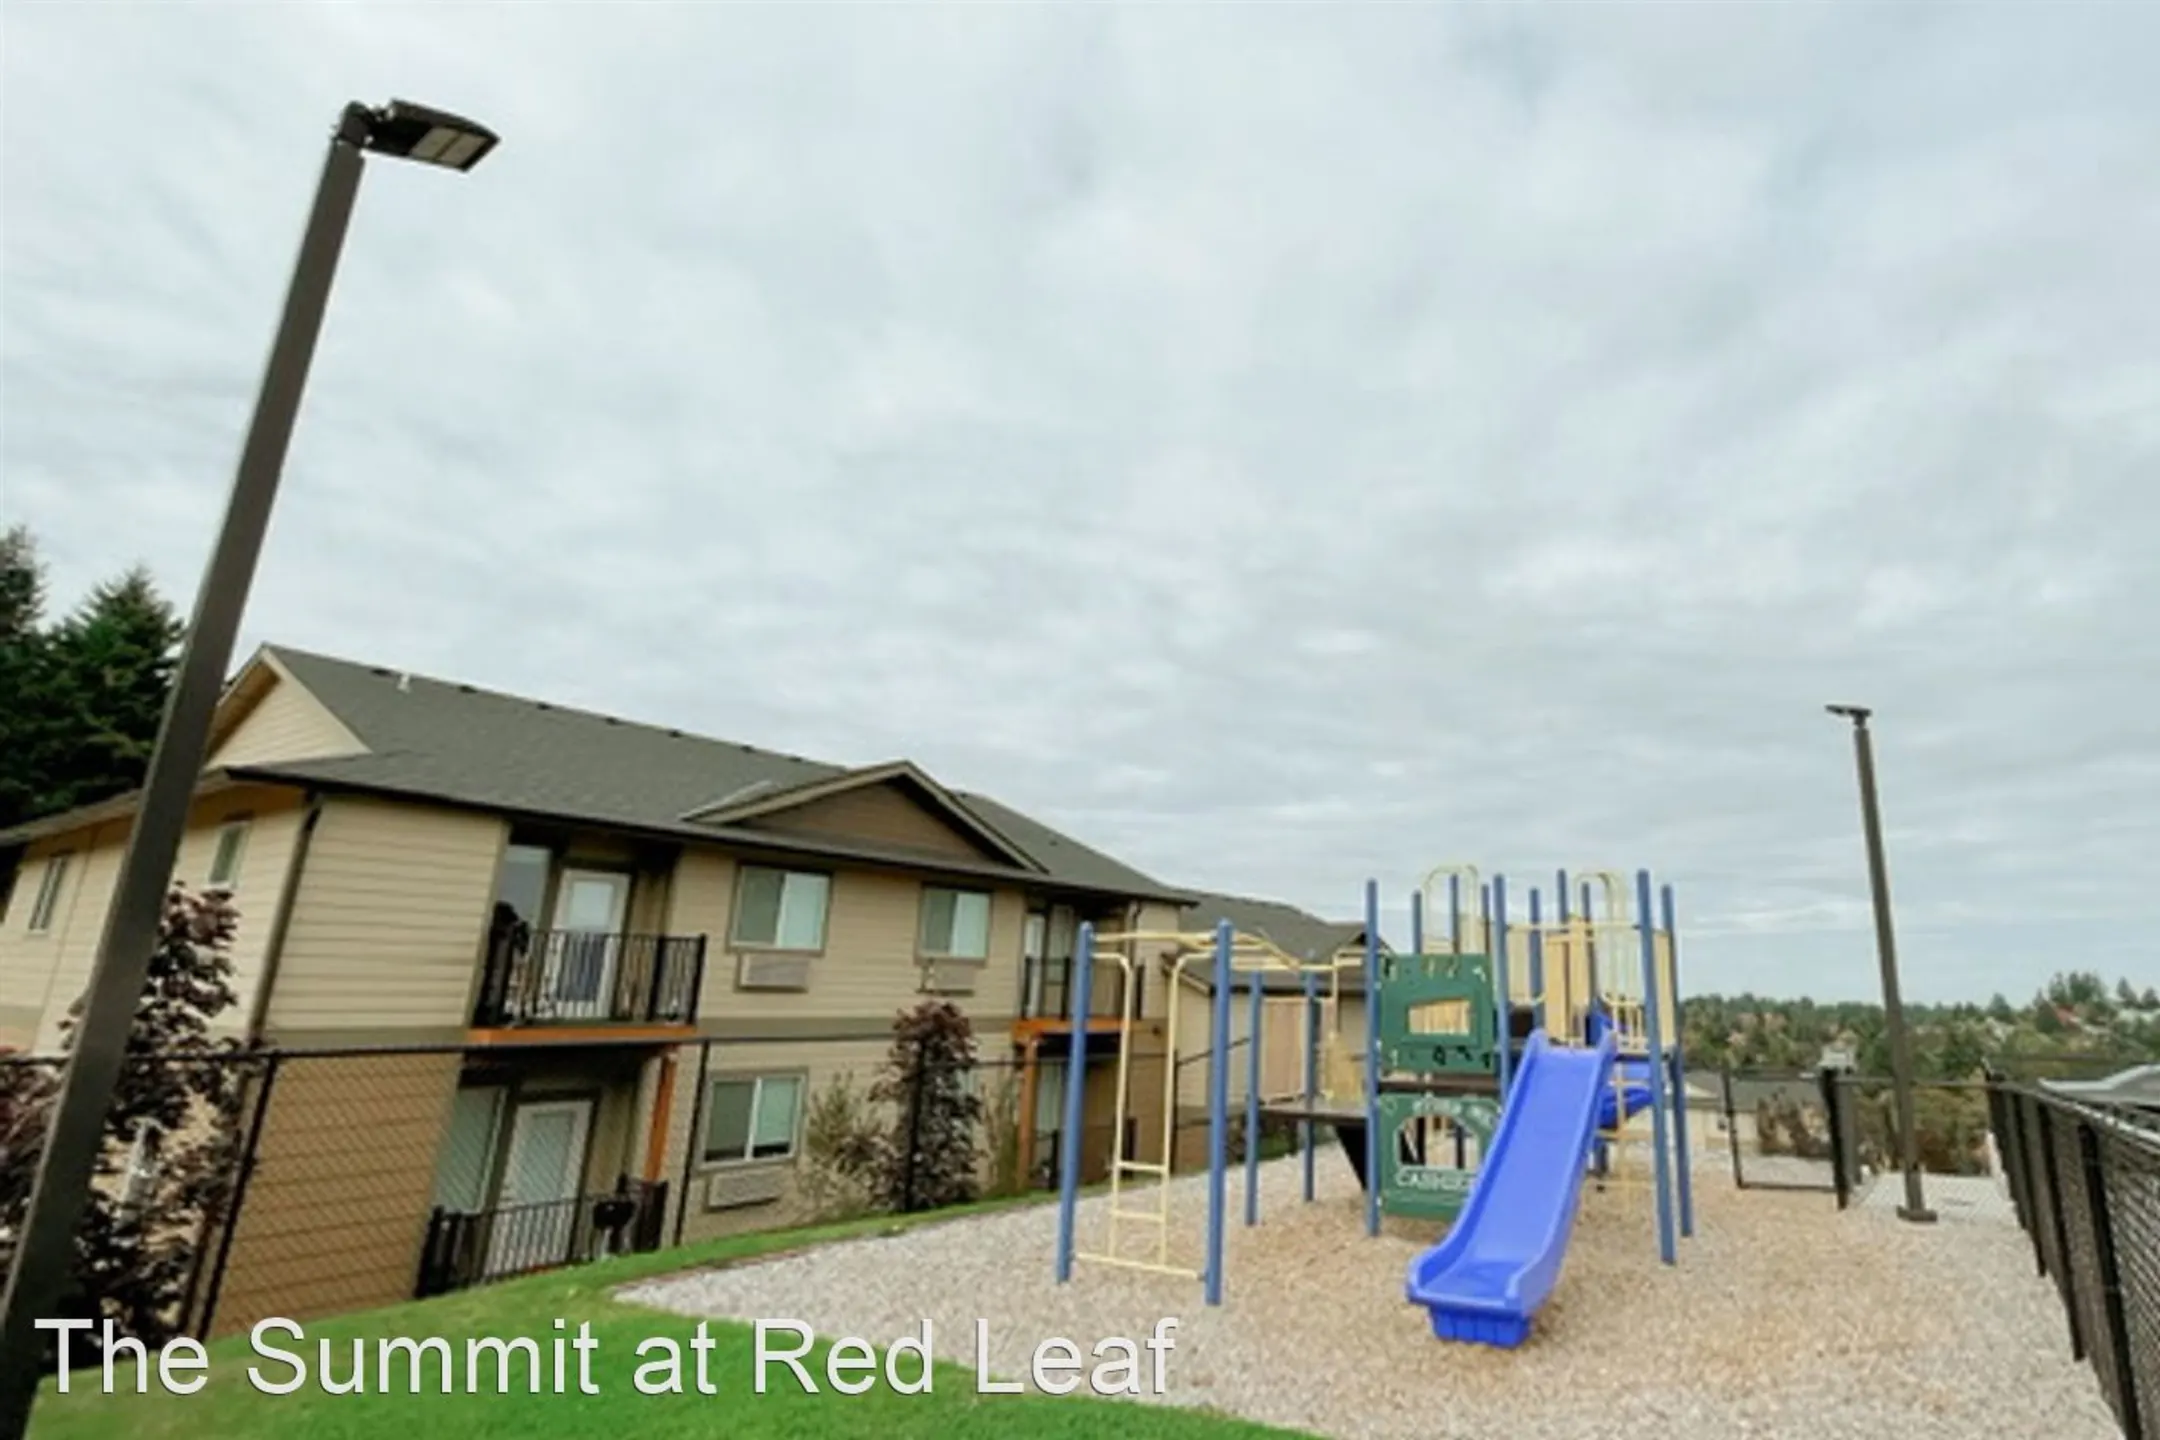 Playground - The Summit at Red Leaf - Salem, OR